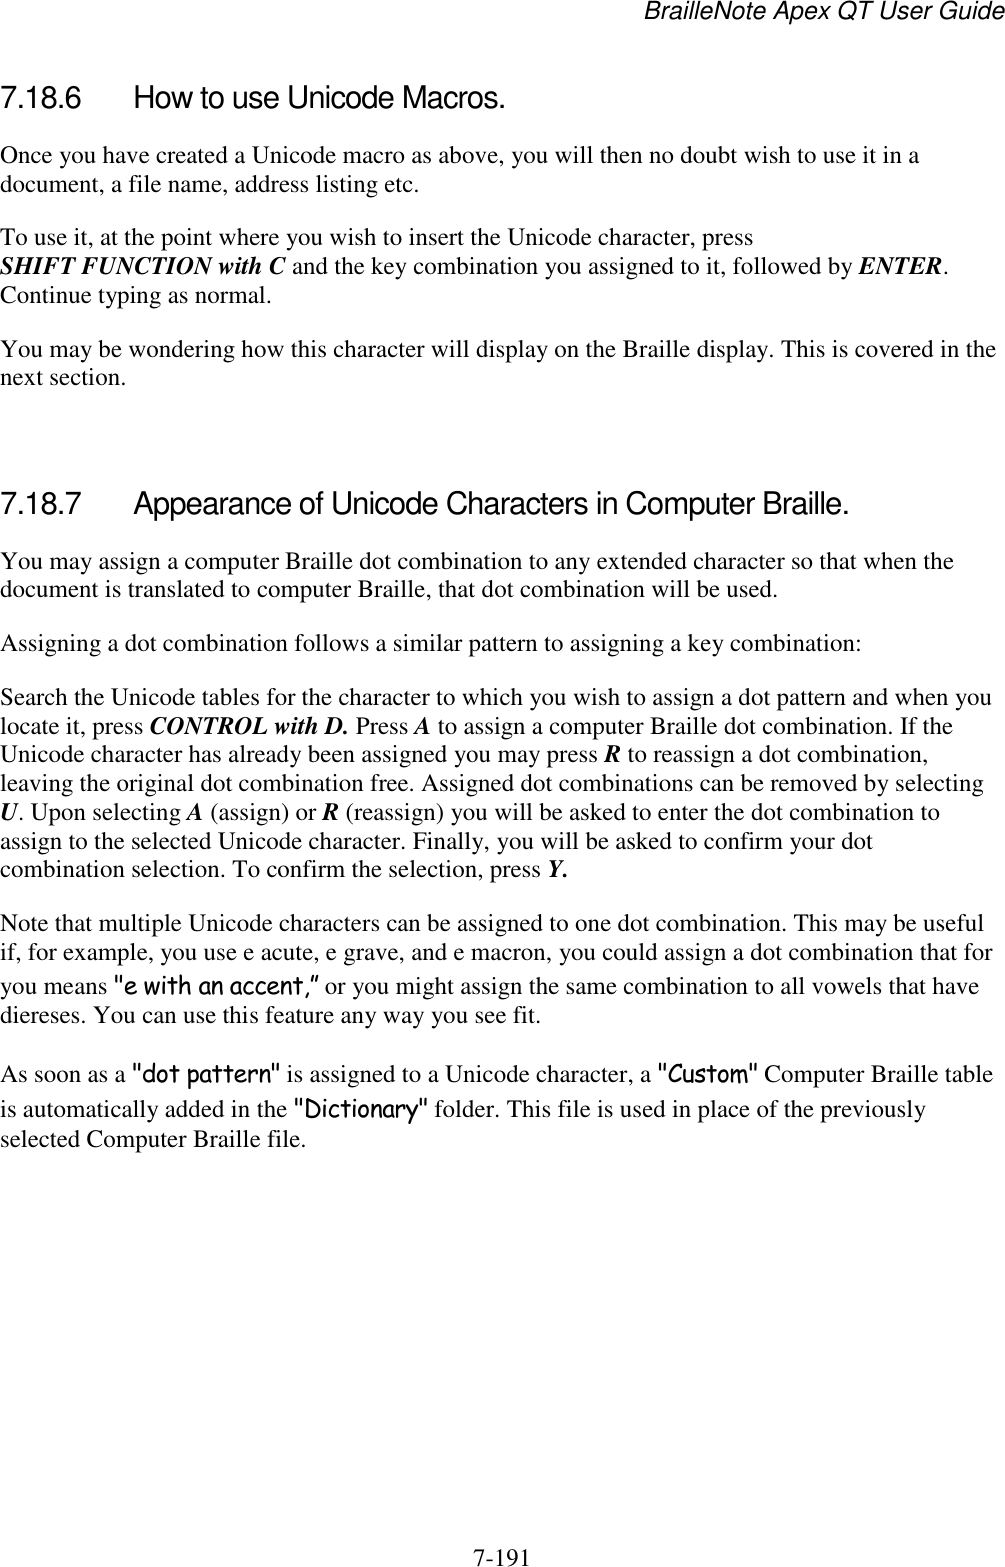 BrailleNote Apex QT User Guide  7-191   7.18.6  How to use Unicode Macros. Once you have created a Unicode macro as above, you will then no doubt wish to use it in a document, a file name, address listing etc. To use it, at the point where you wish to insert the Unicode character, press SHIFT FUNCTION with C and the key combination you assigned to it, followed by ENTER. Continue typing as normal. You may be wondering how this character will display on the Braille display. This is covered in the next section.   7.18.7  Appearance of Unicode Characters in Computer Braille. You may assign a computer Braille dot combination to any extended character so that when the document is translated to computer Braille, that dot combination will be used. Assigning a dot combination follows a similar pattern to assigning a key combination: Search the Unicode tables for the character to which you wish to assign a dot pattern and when you locate it, press CONTROL with D. Press A to assign a computer Braille dot combination. If the Unicode character has already been assigned you may press R to reassign a dot combination, leaving the original dot combination free. Assigned dot combinations can be removed by selecting U. Upon selecting A (assign) or R (reassign) you will be asked to enter the dot combination to assign to the selected Unicode character. Finally, you will be asked to confirm your dot combination selection. To confirm the selection, press Y. Note that multiple Unicode characters can be assigned to one dot combination. This may be useful if, for example, you use e acute, e grave, and e macron, you could assign a dot combination that for you means &quot;e with an accent,” or you might assign the same combination to all vowels that have diereses. You can use this feature any way you see fit. As soon as a &quot;dot pattern&quot; is assigned to a Unicode character, a &quot;Custom&quot; Computer Braille table is automatically added in the &quot;Dictionary&quot; folder. This file is used in place of the previously selected Computer Braille file.   